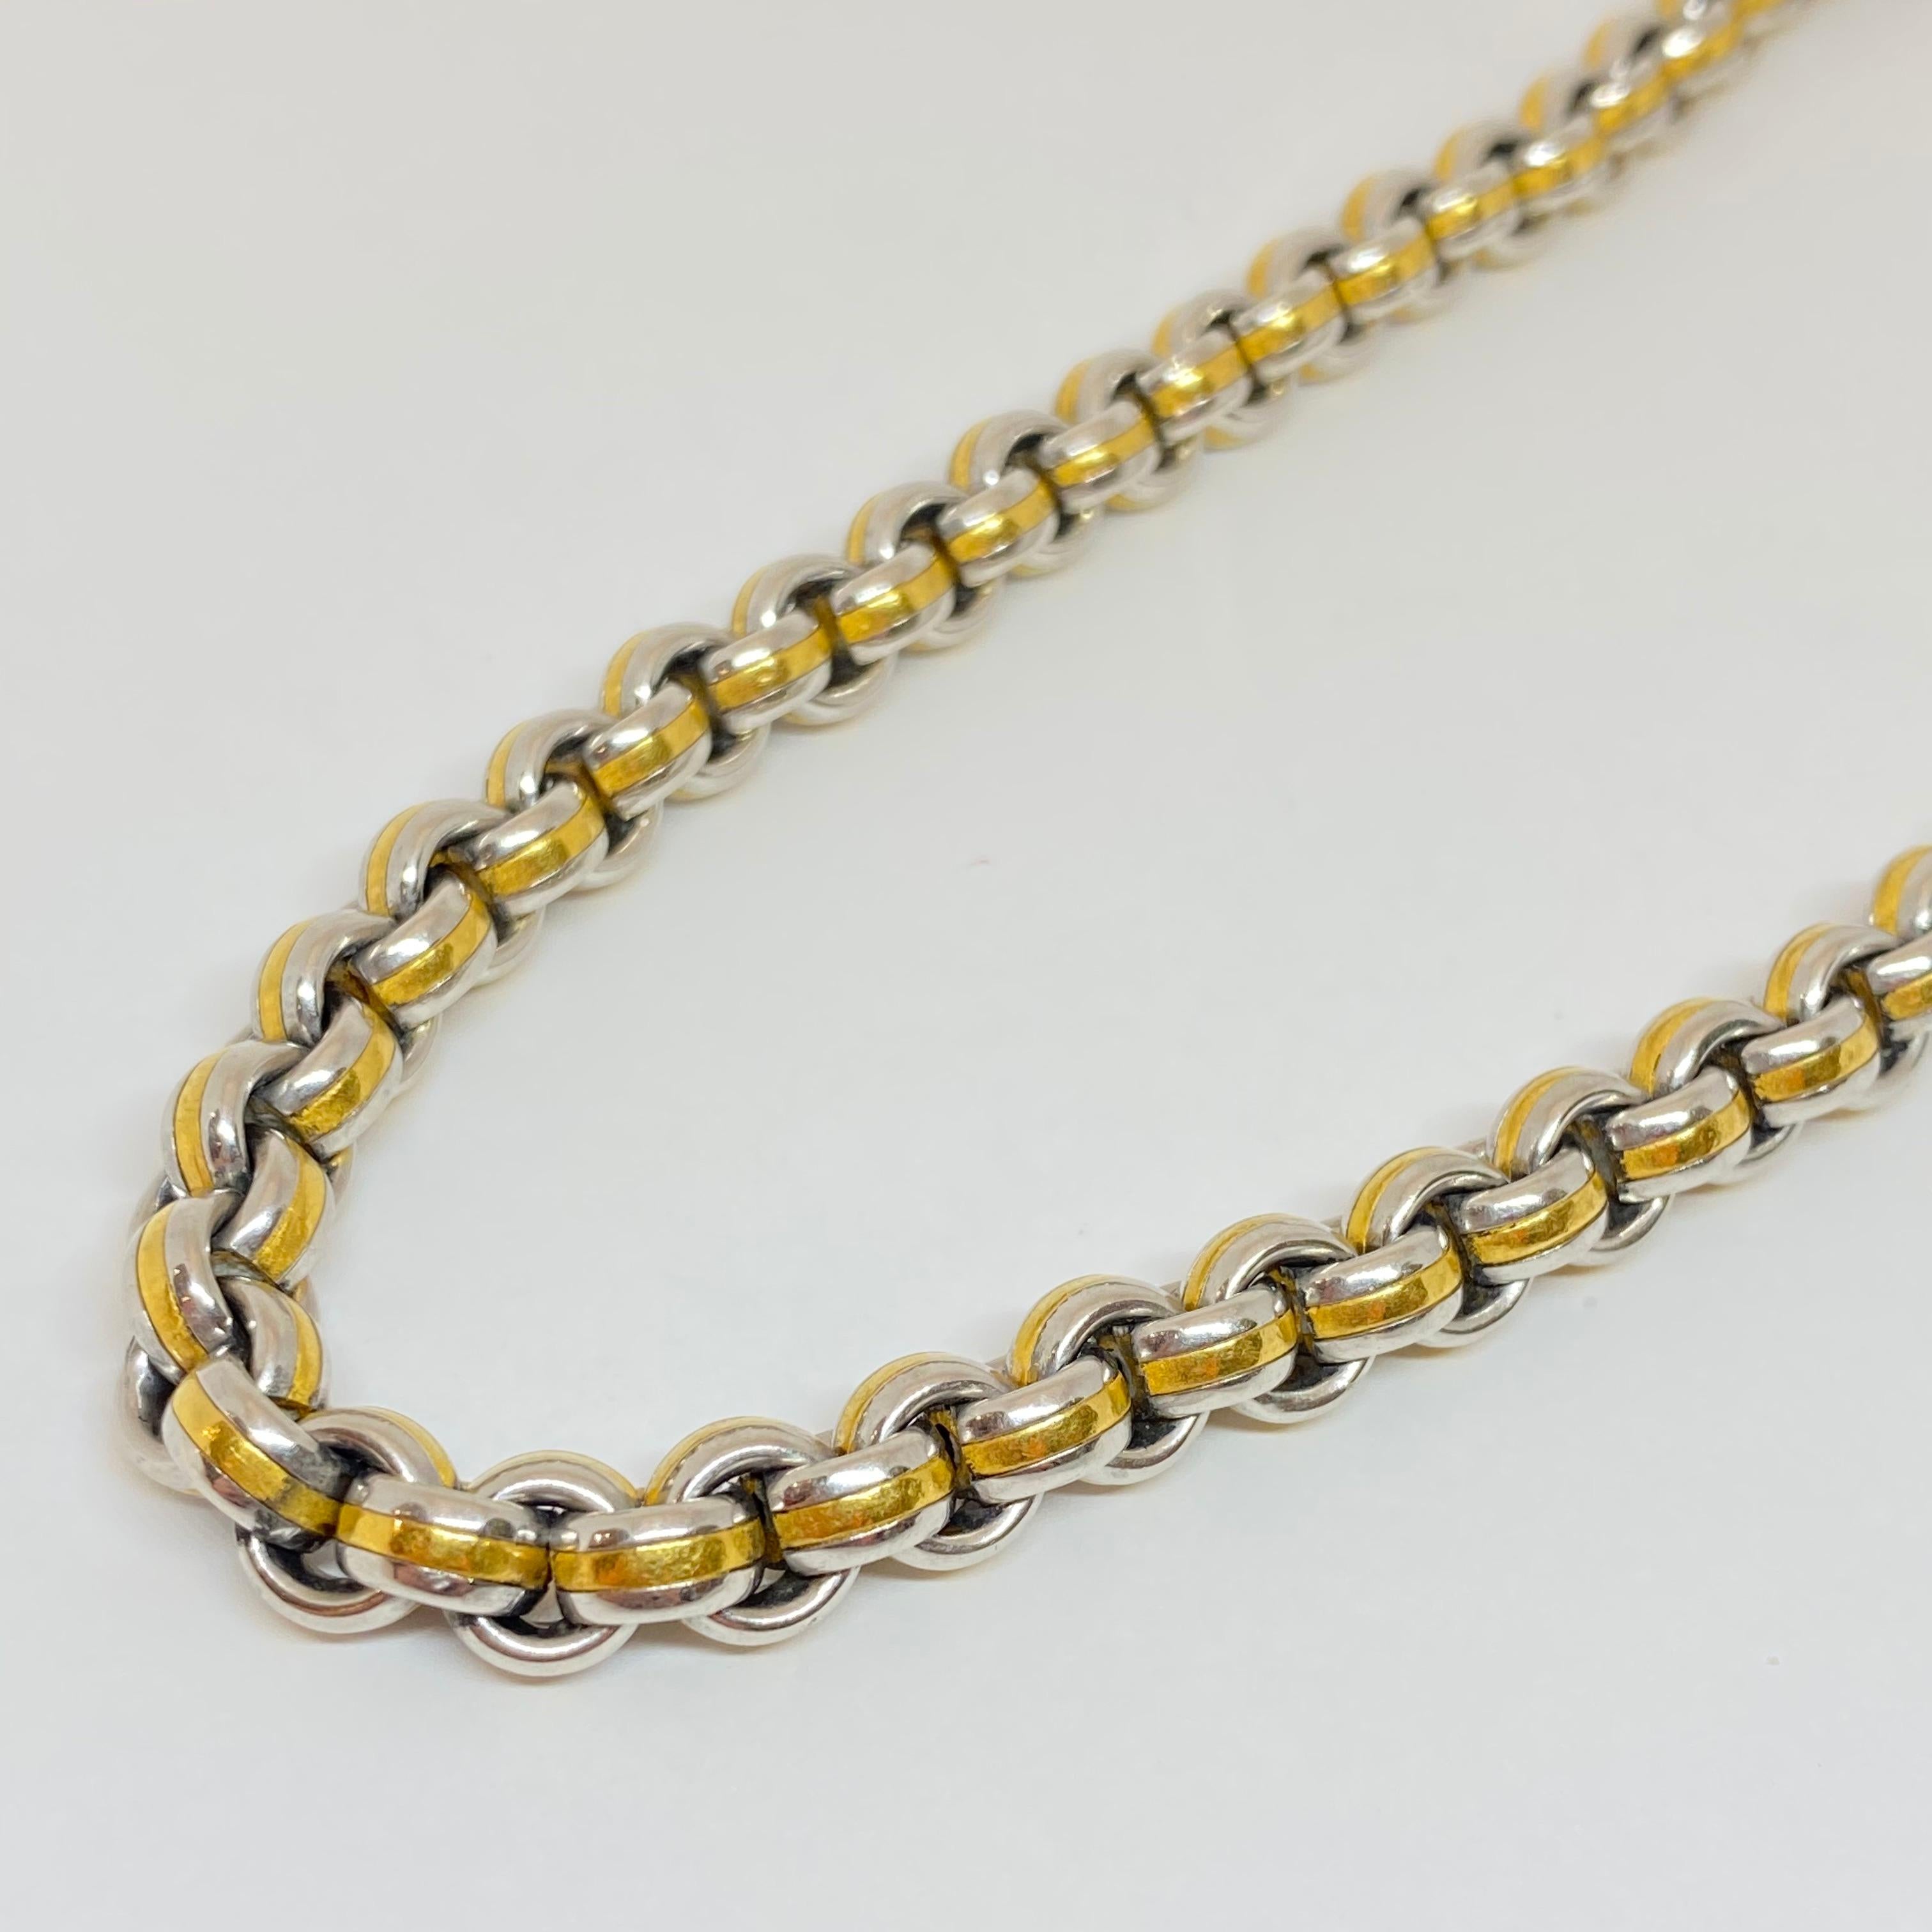 Vintage estate necklace designed in heavy platinum and 22 karat solid rolled yellow gold. The necklace measures 8mm wide, 17.50 